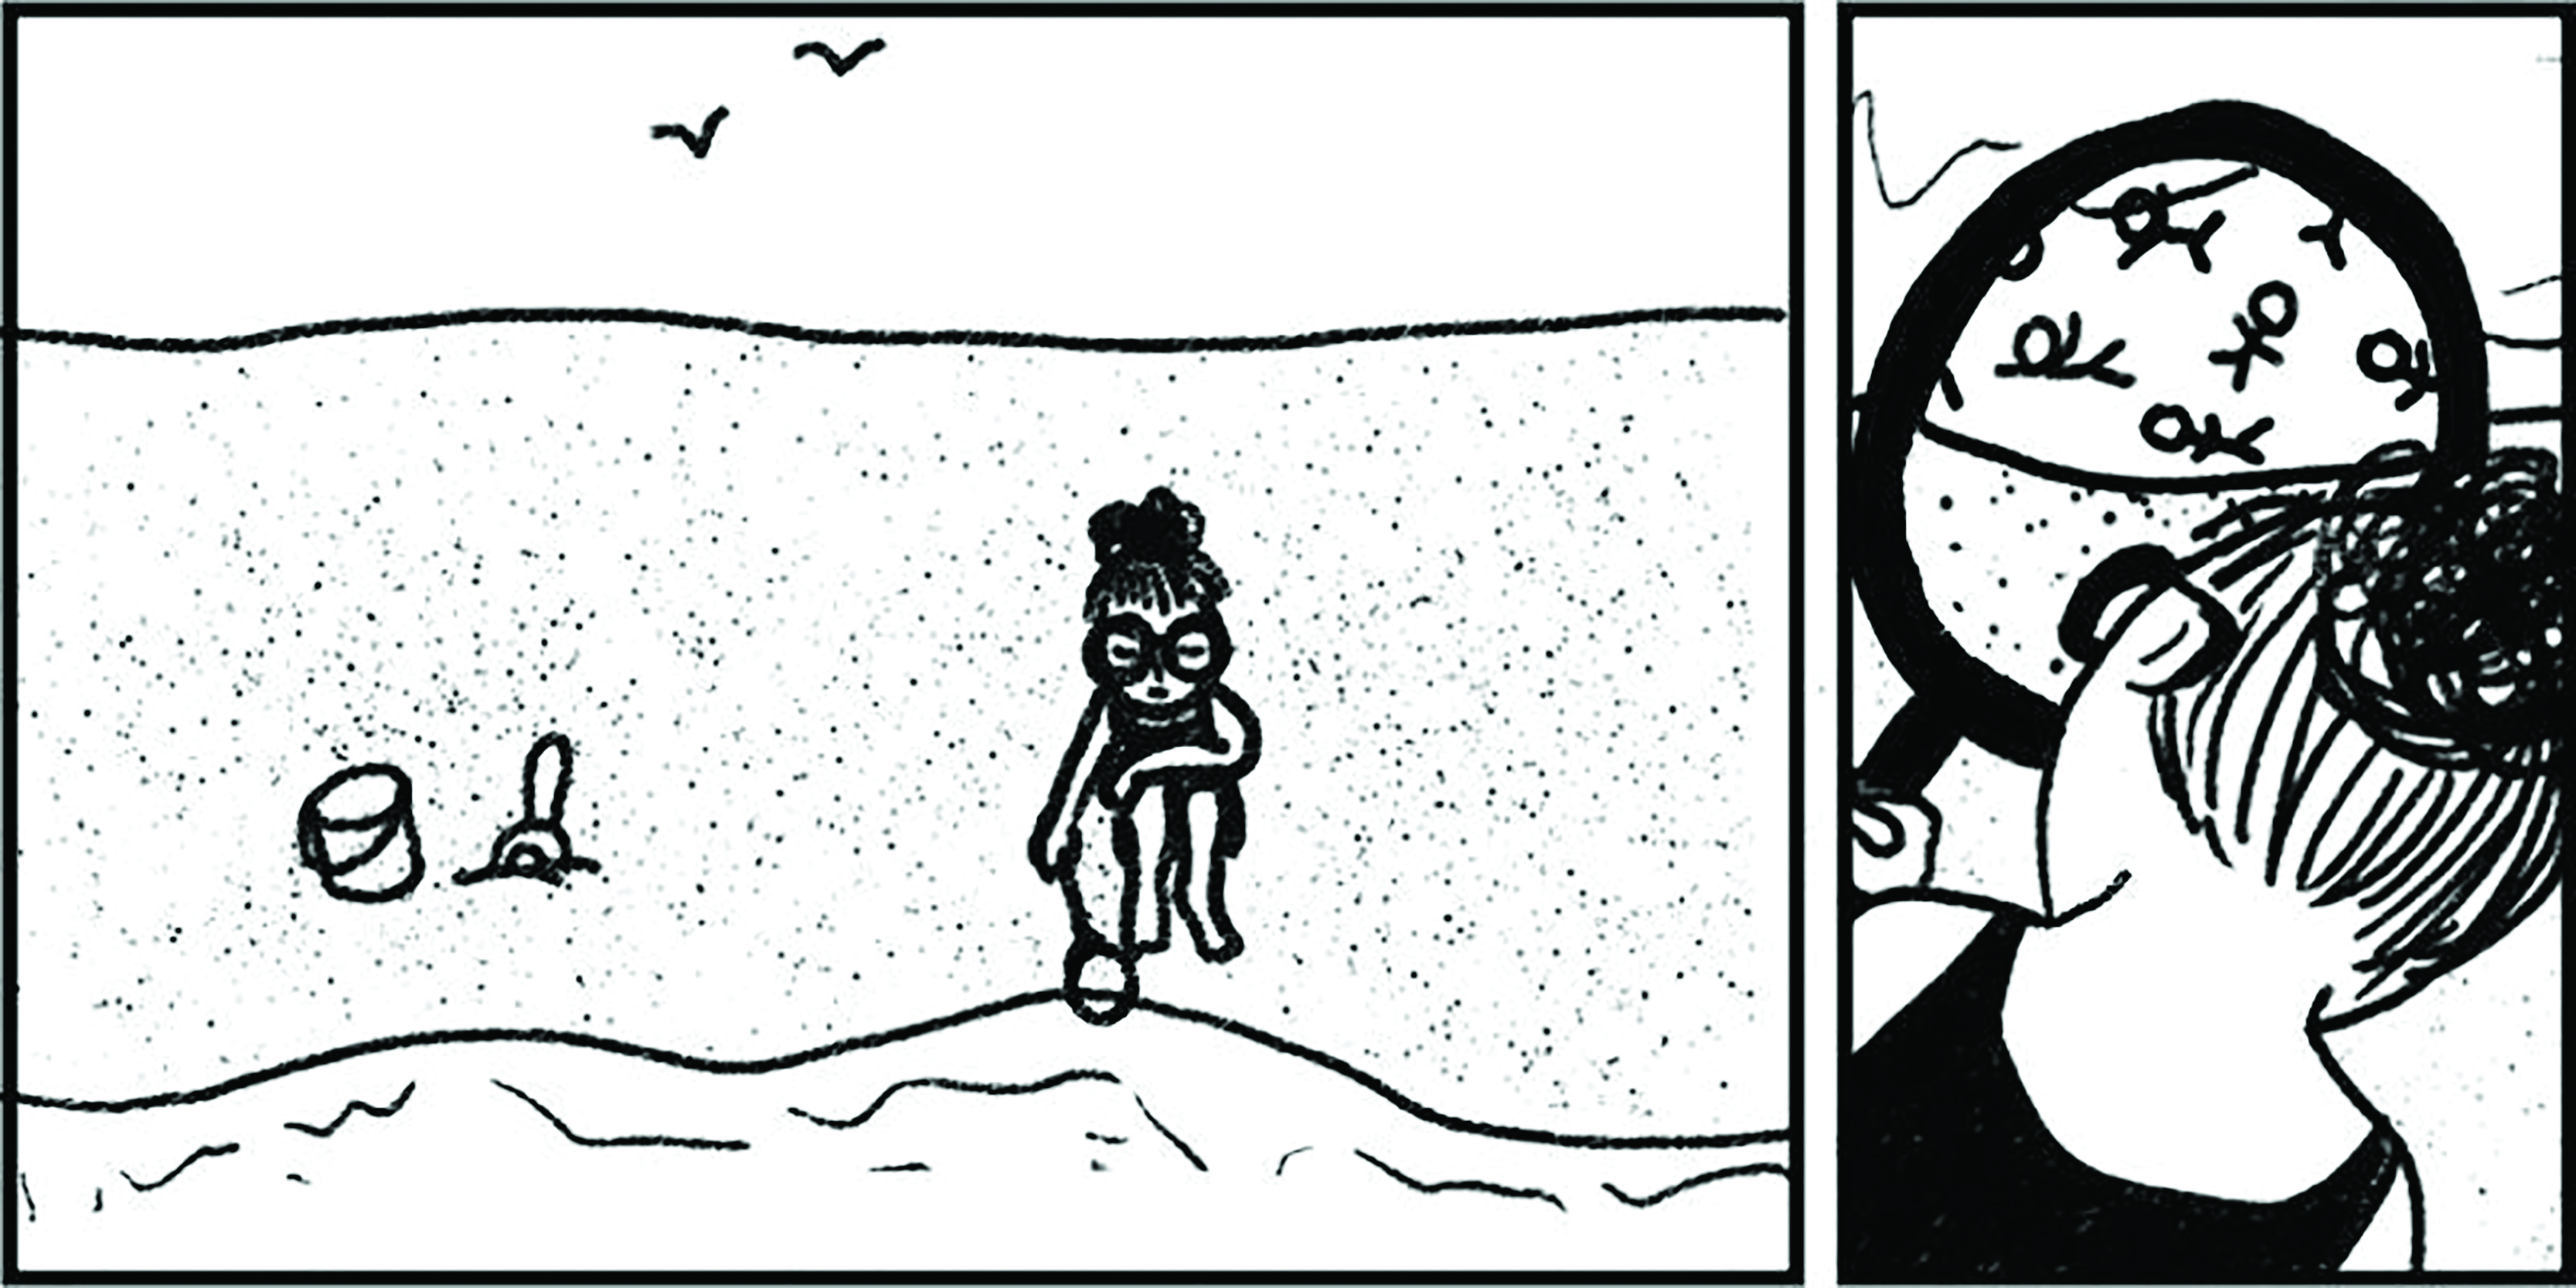 A two-panel comic where the first panel shows a girl sitting at the beach next and the second panel shows a close-up of the girl looking through a magnifying glass seeing small human characters in the water.